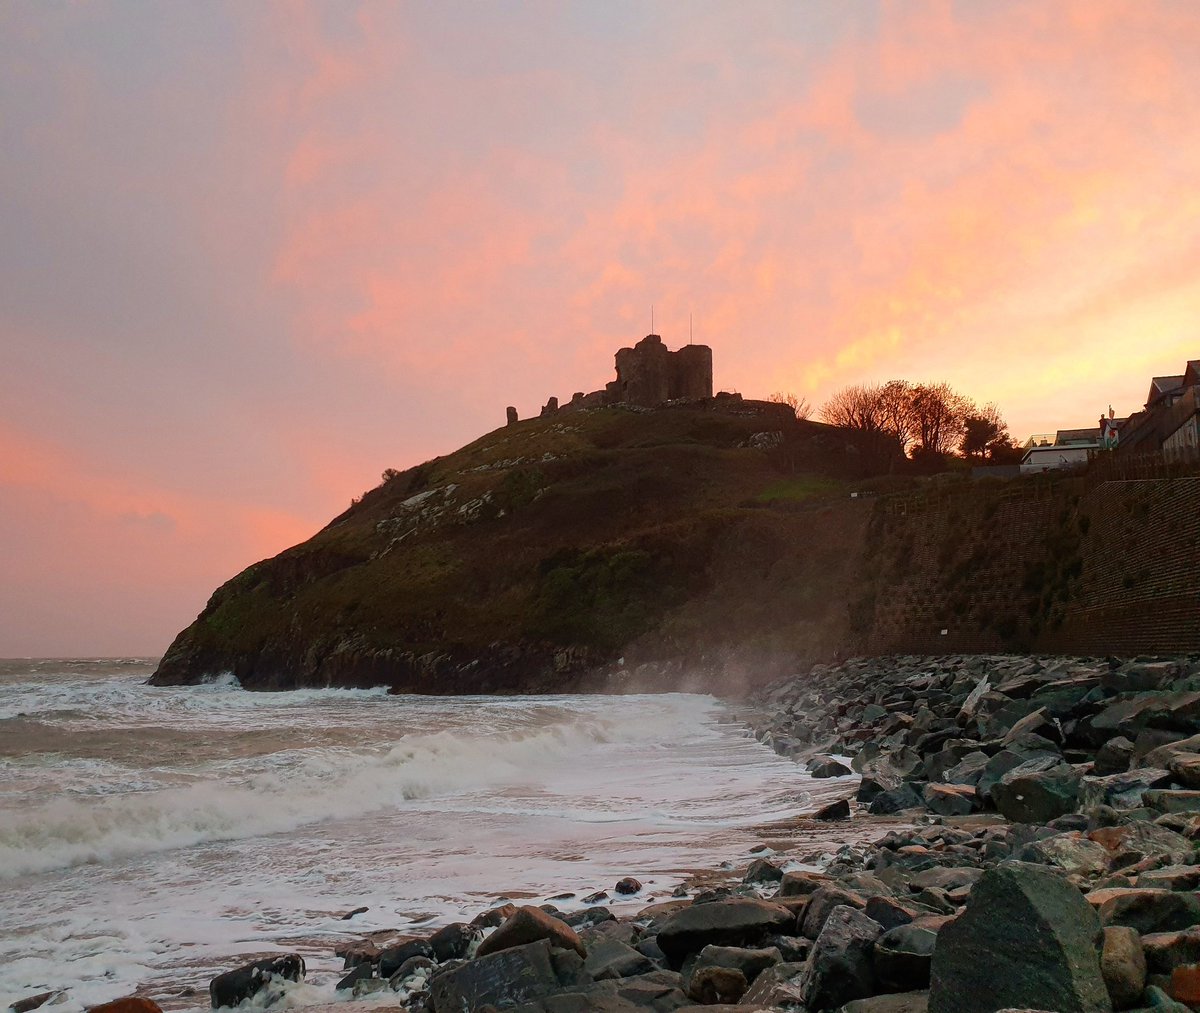 The awesome #CricciethCastle really does capture the imagination. It stands proudly on its own rocky headland, between two beaches, with stunning views across #CardiganBay. It was definitely a great autumn holiday destination! 🏰

#Criccieth #Wales #Coast #Sea #Sunset #Autumn